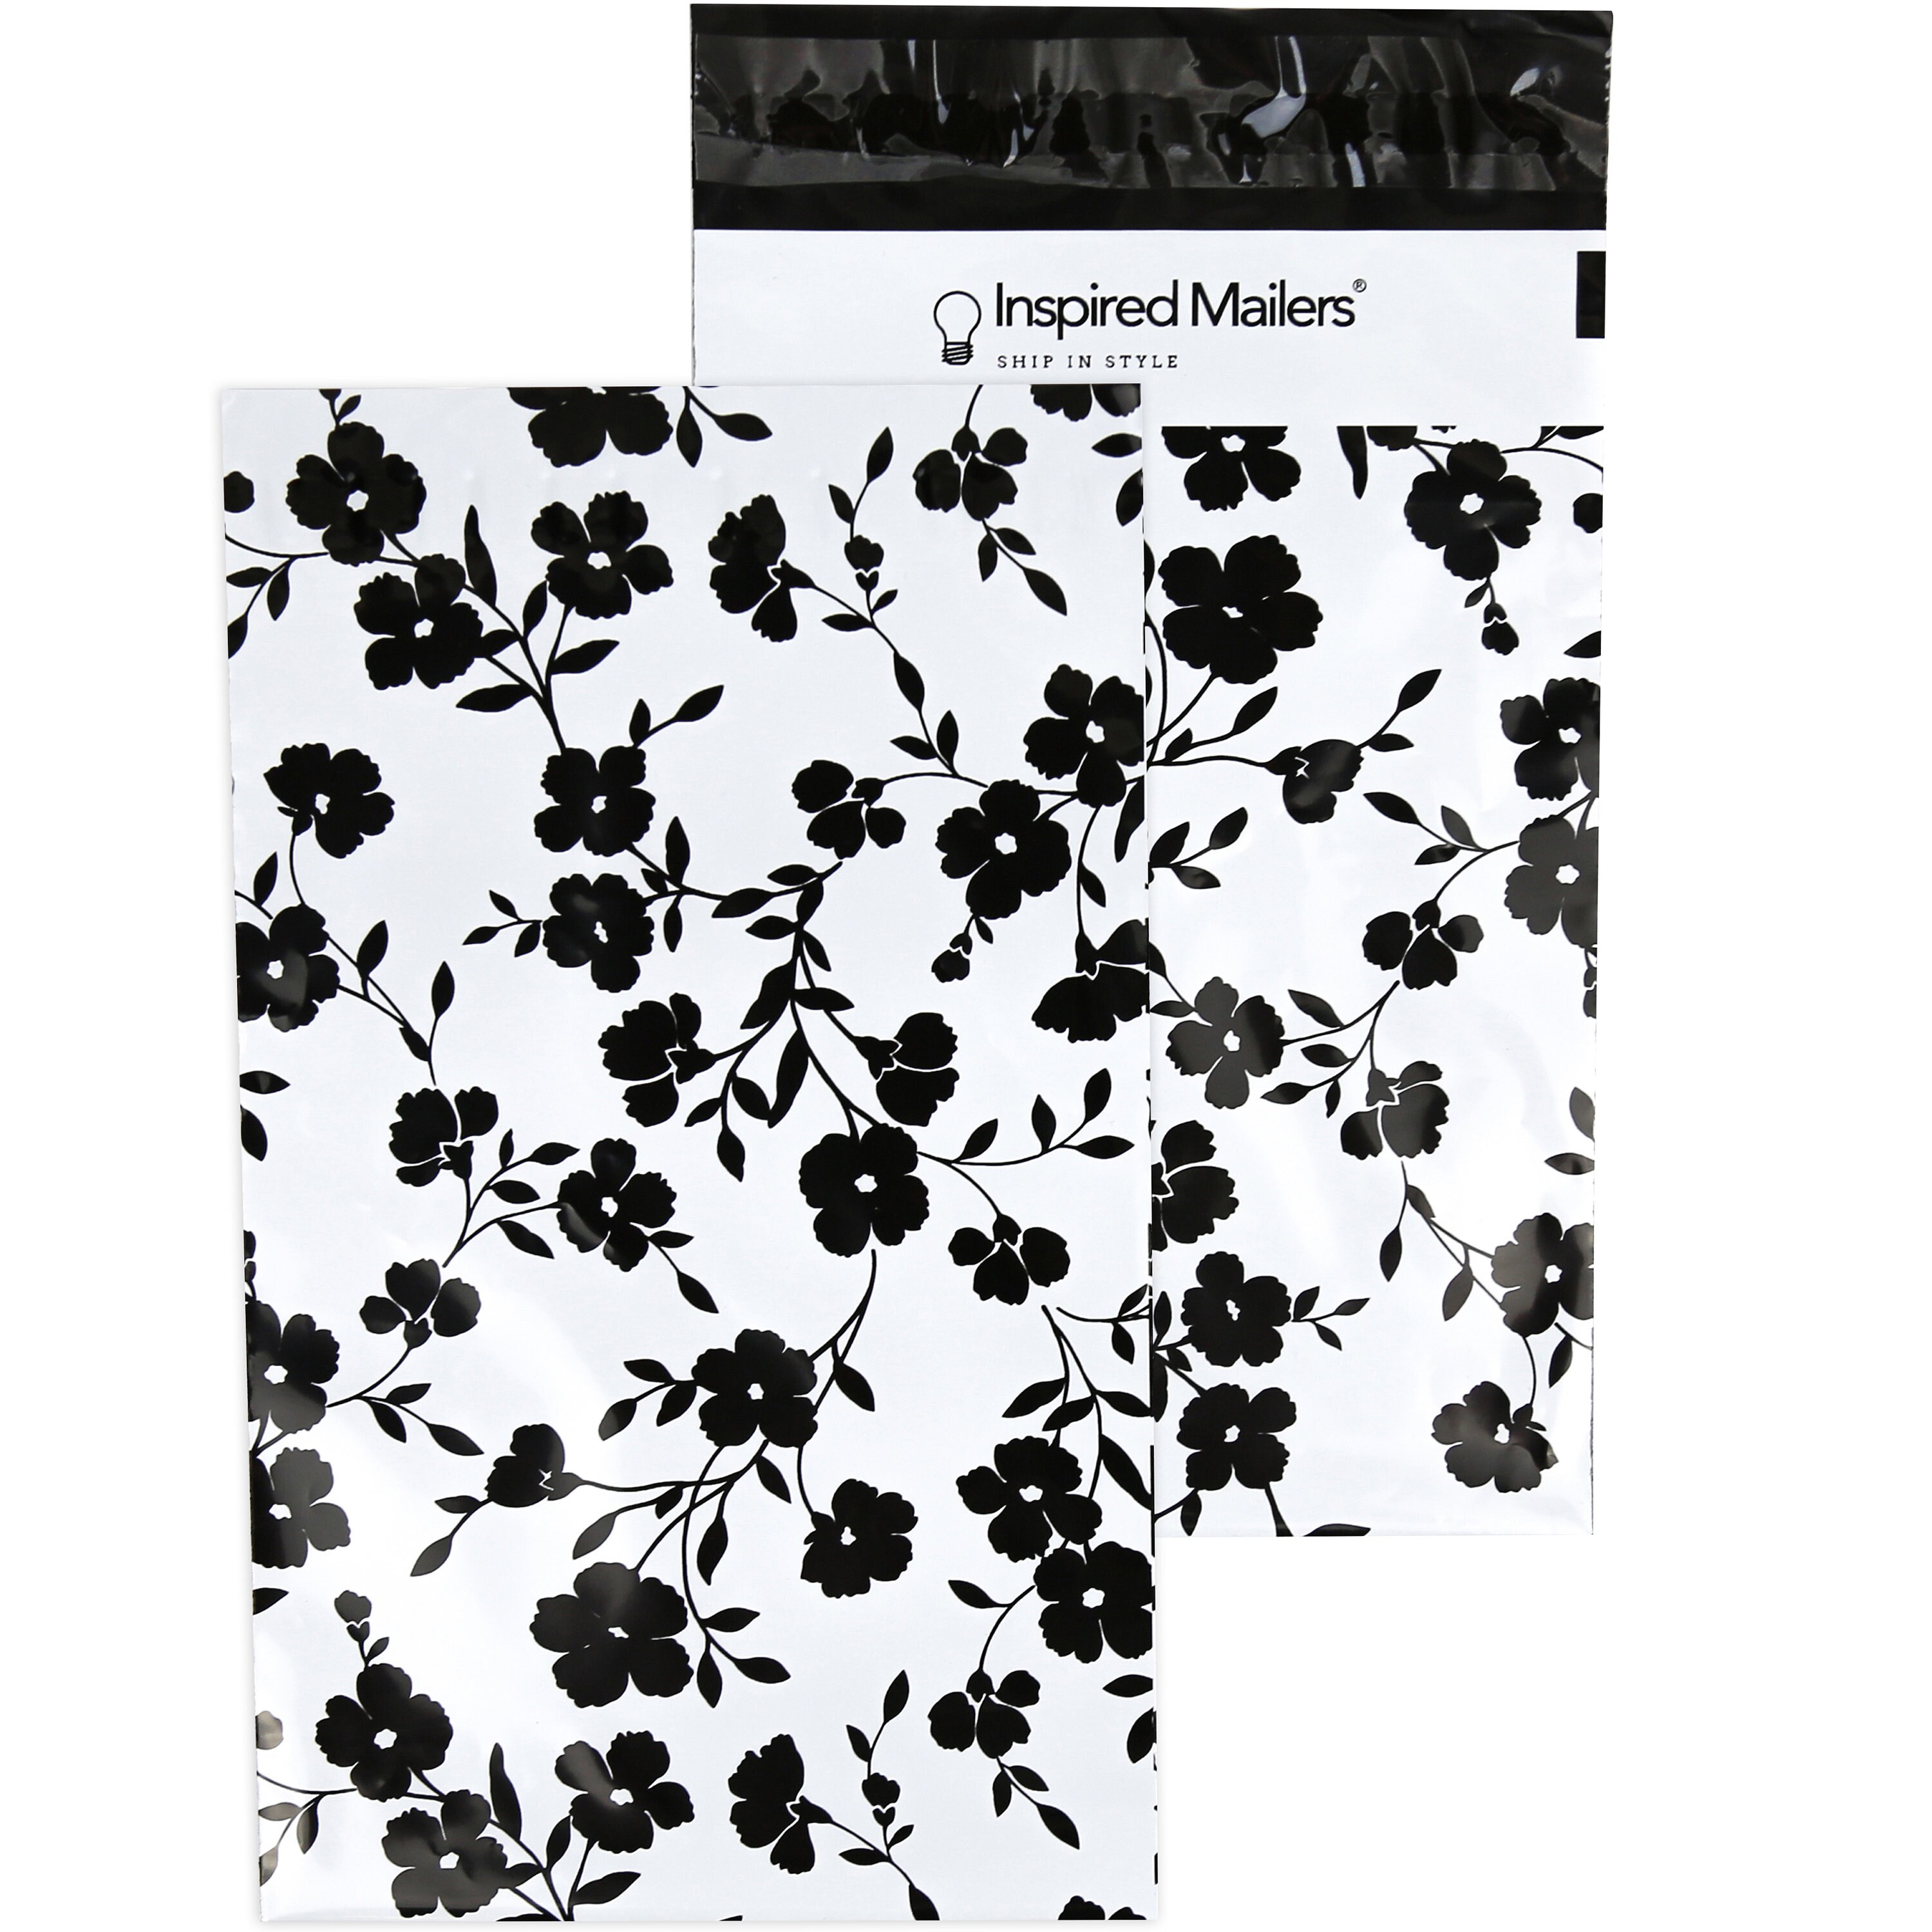 Pack of 100 Black and White Arrows Printed Mailers 6x9"